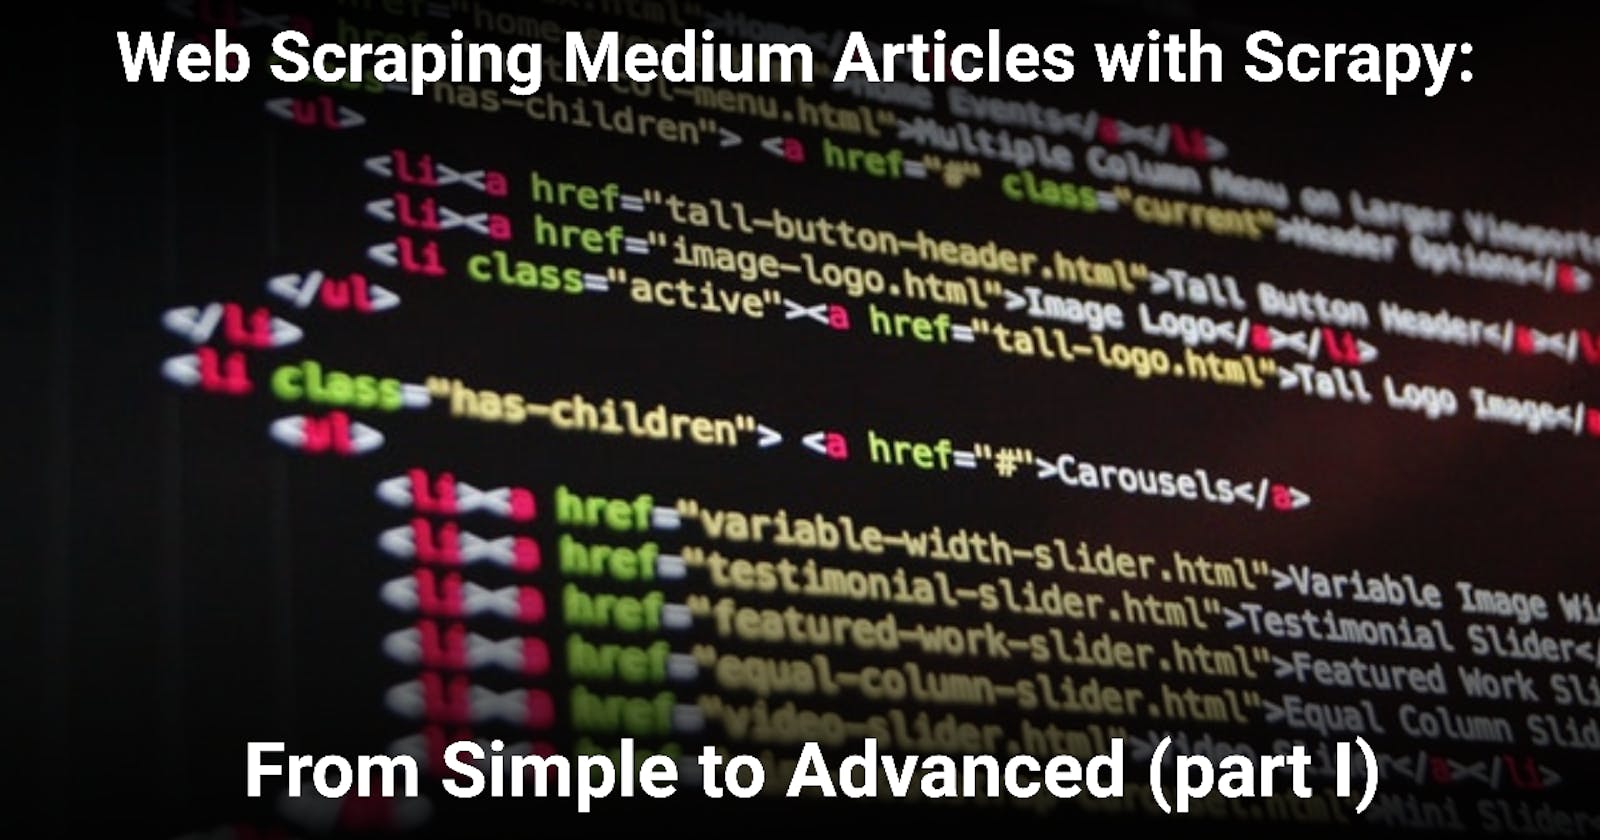 Web Scraping Medium Articles with Scrapy: From Simple to Advanced (part I)